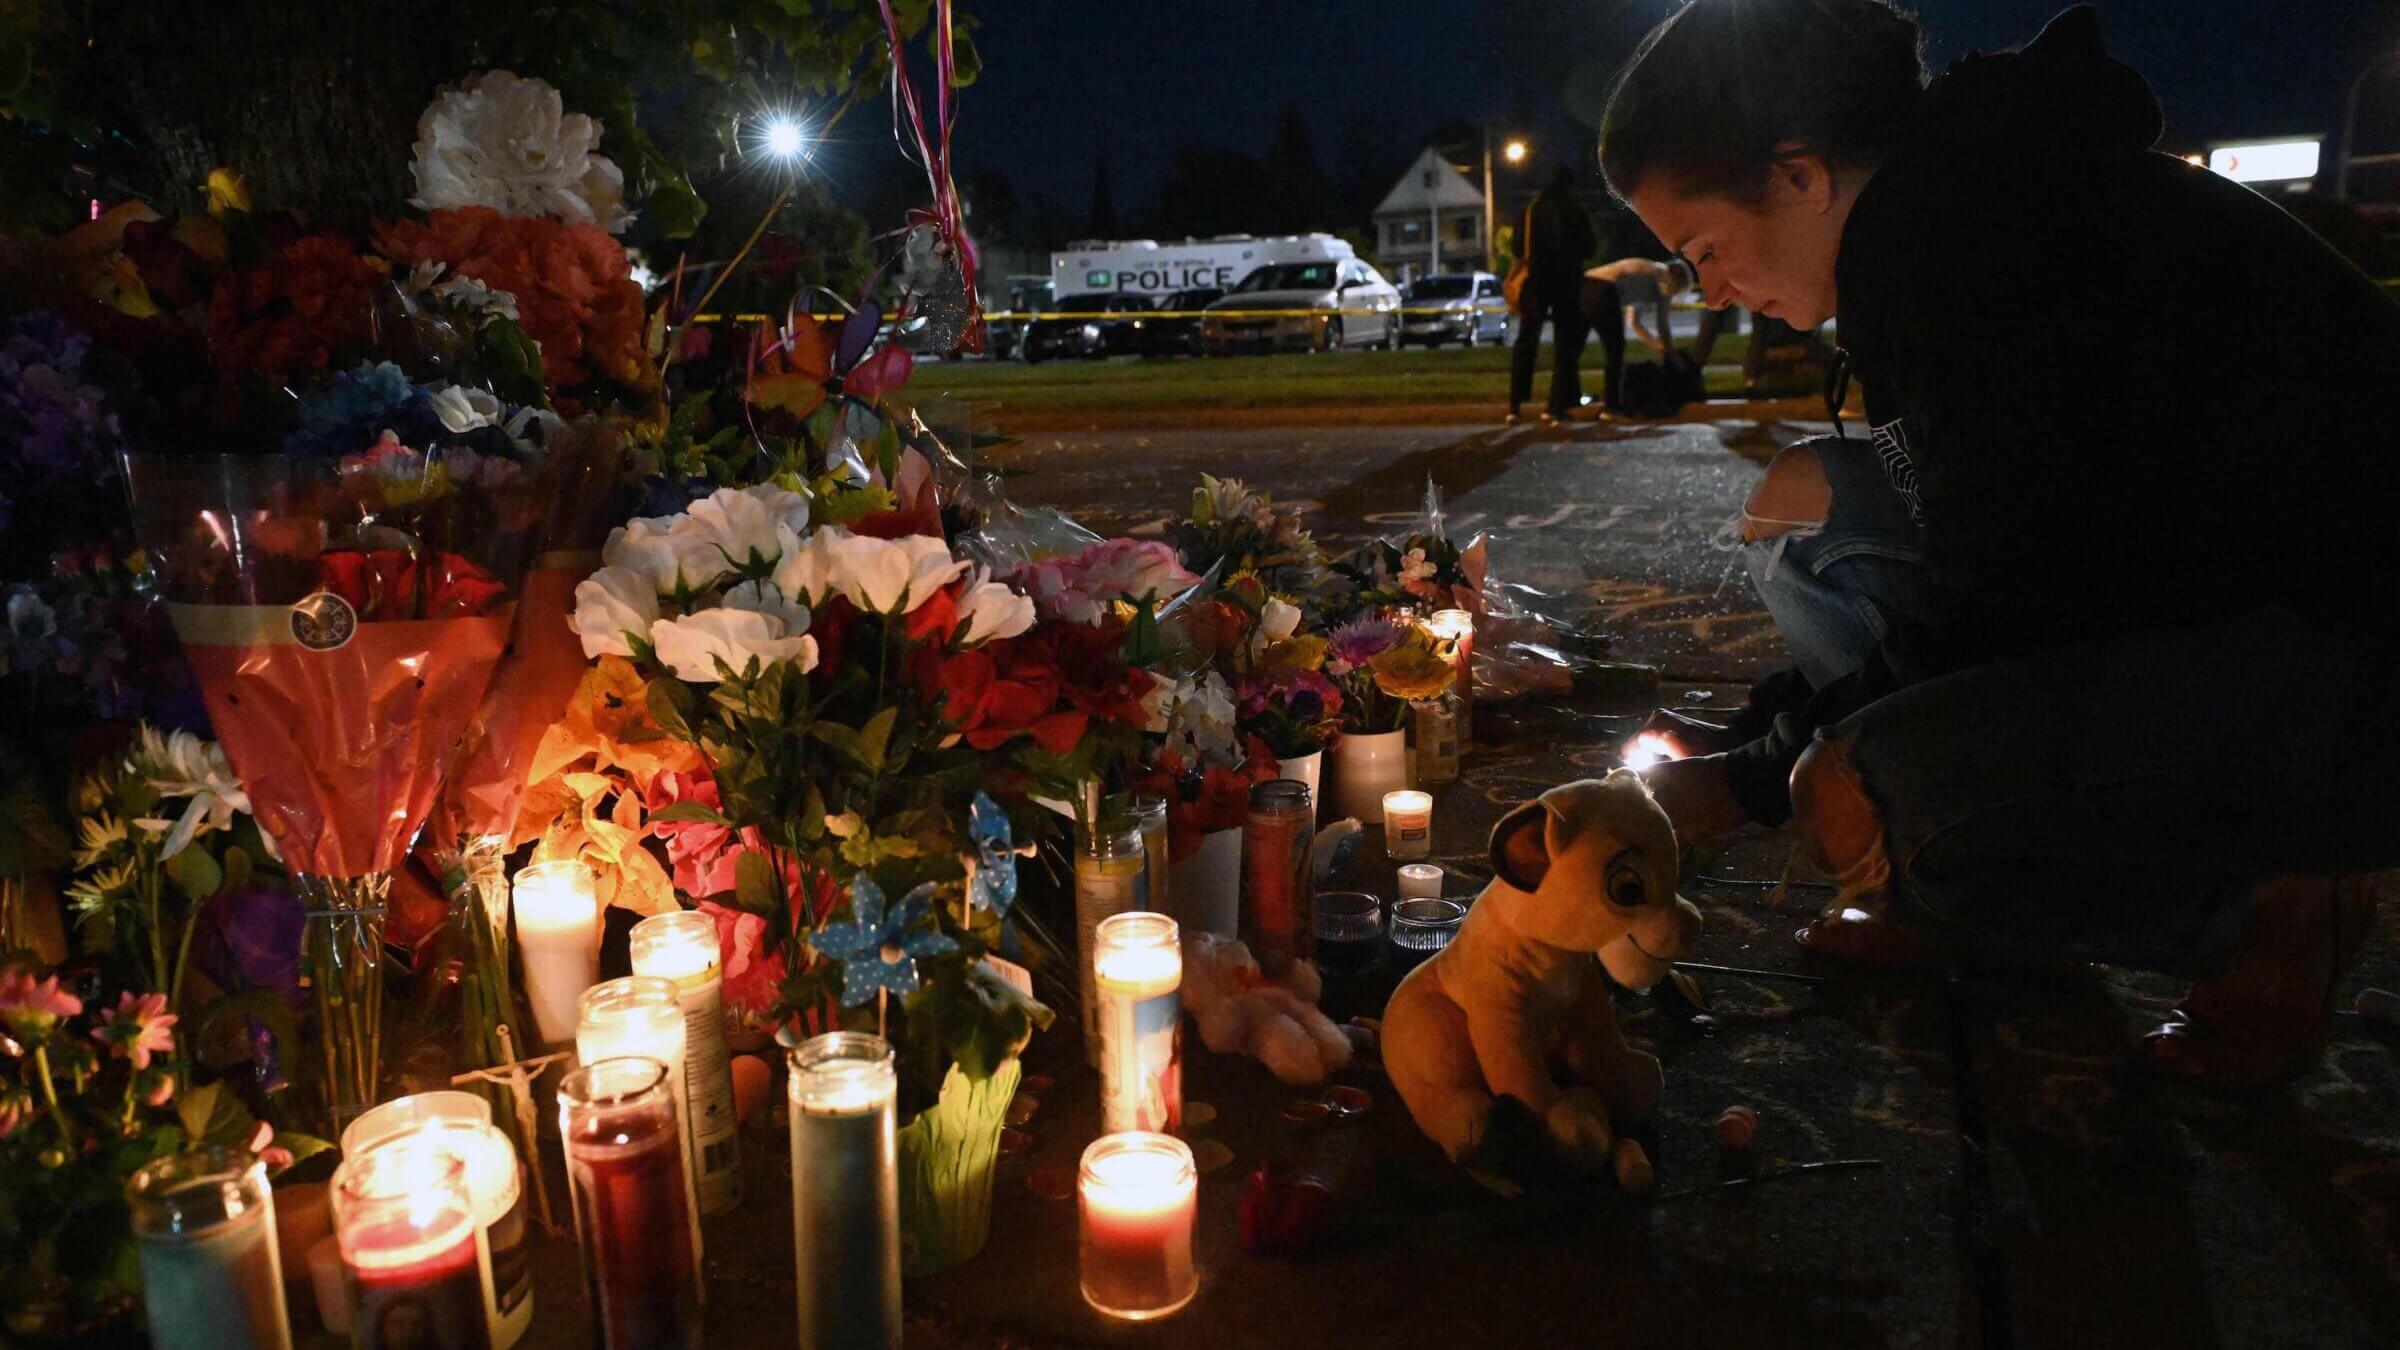 People light candles at a makeshift memorial near a Tops Grocery store in Buffalo, New York, the day after a gunman shot dead 10 people. The alleged shooter appears to have used 4chan, an online forum, to discuss his racist and antisemitic ideology.